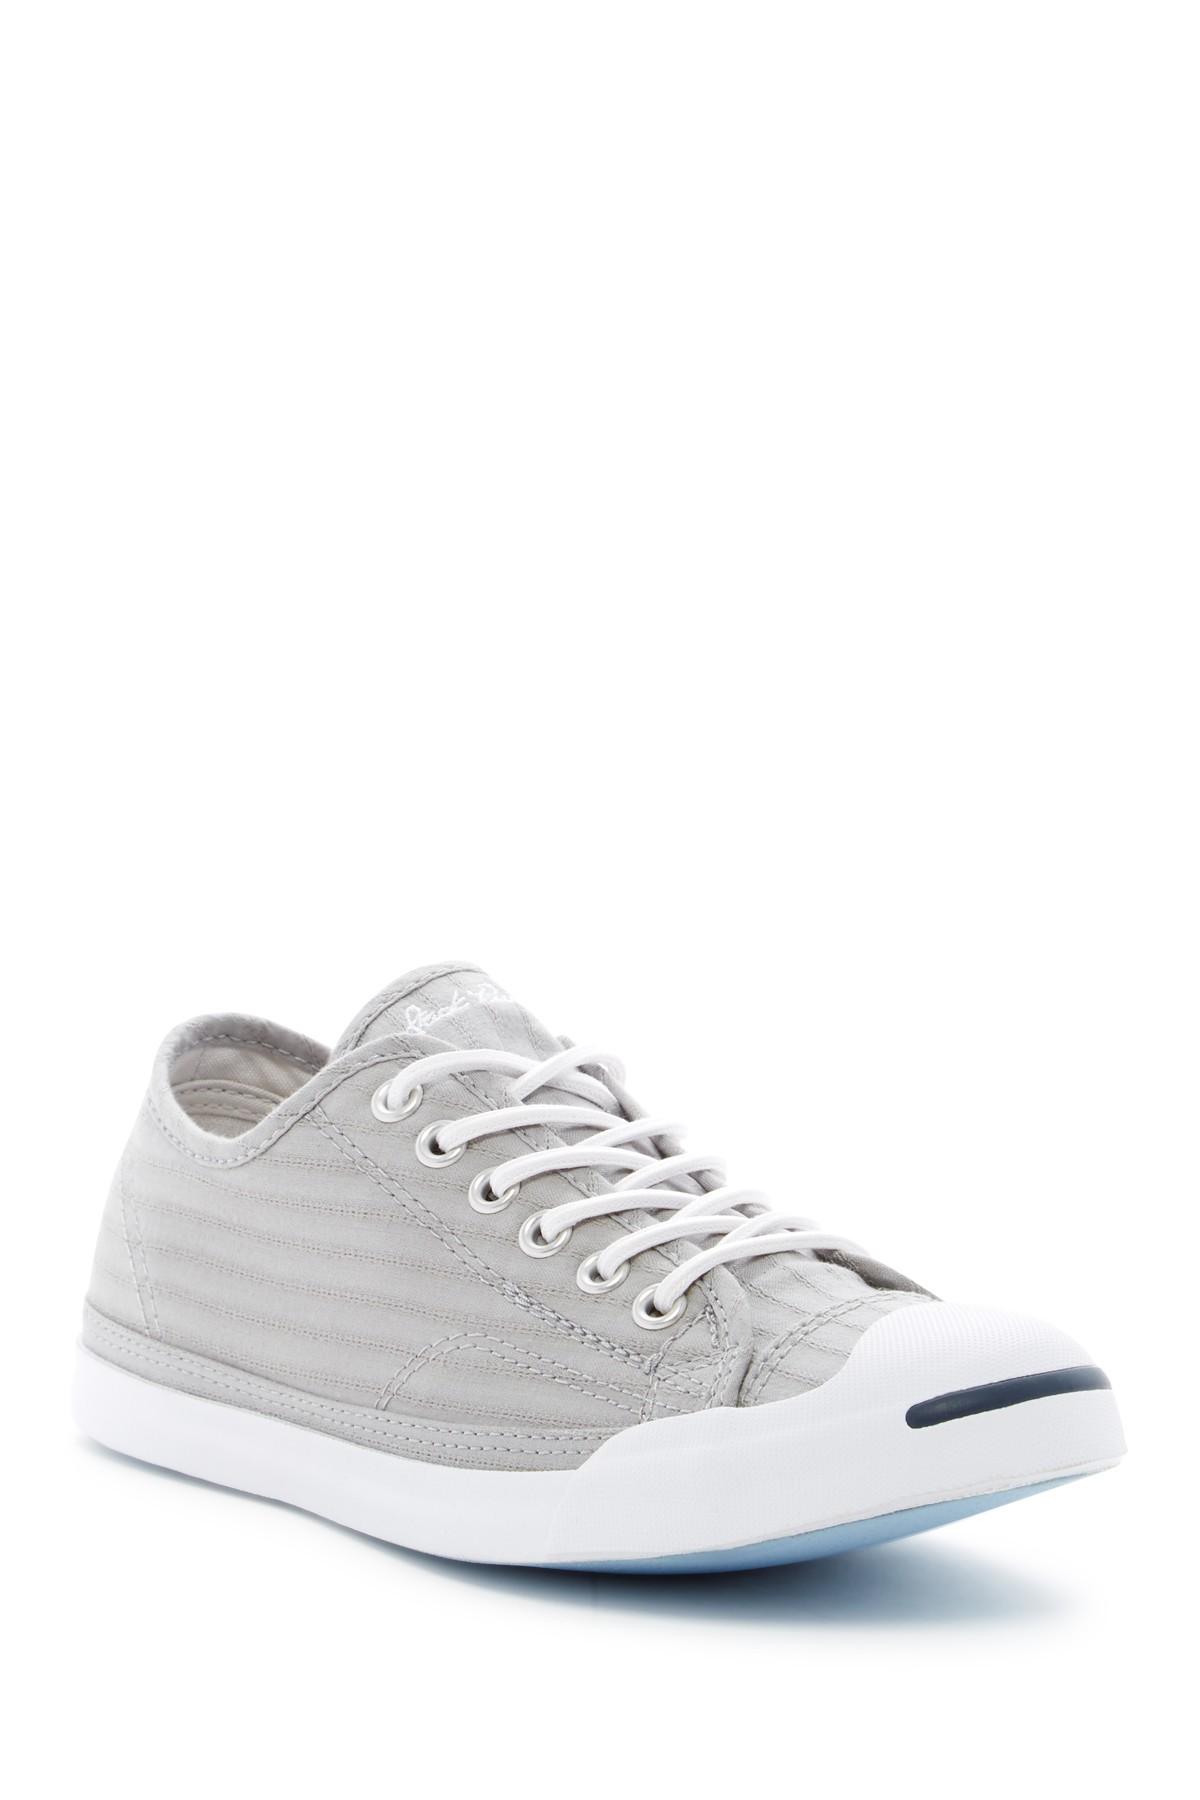 jack purcell low profile womens